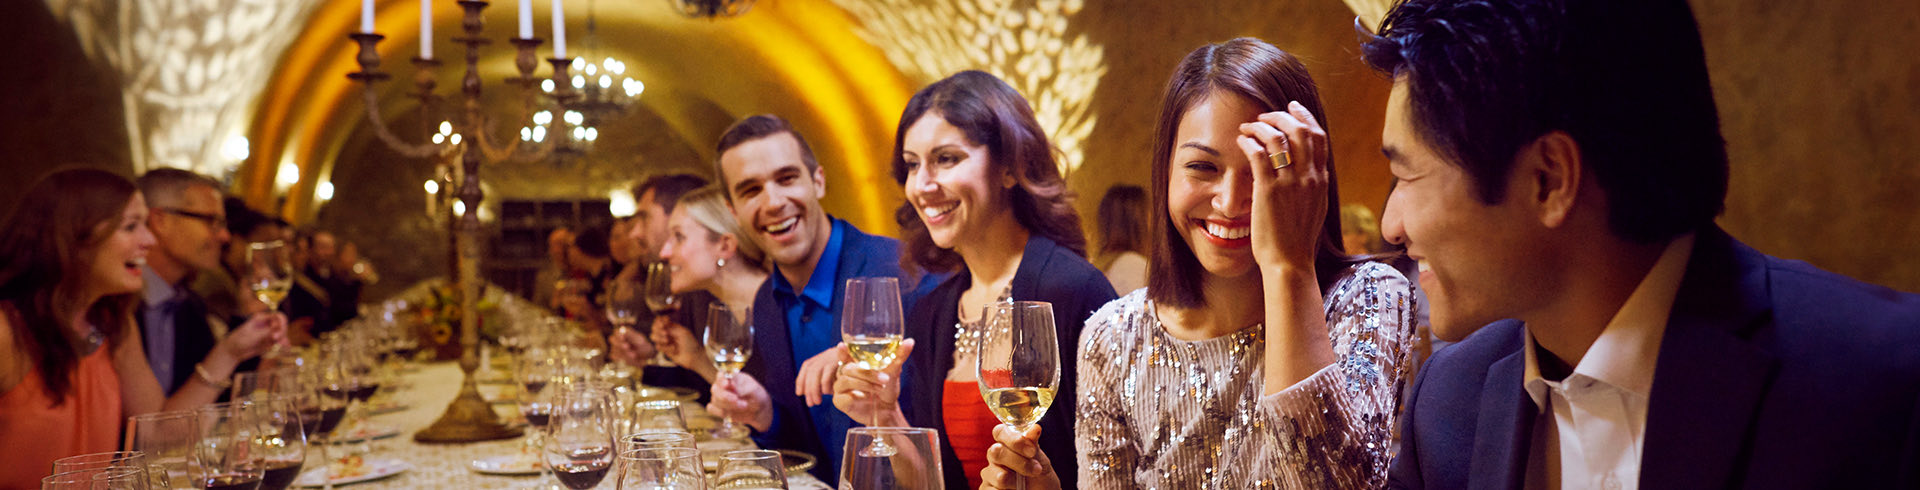 People gathered sitting and smiling  in a fancy large restaurant table having a glass of white wine